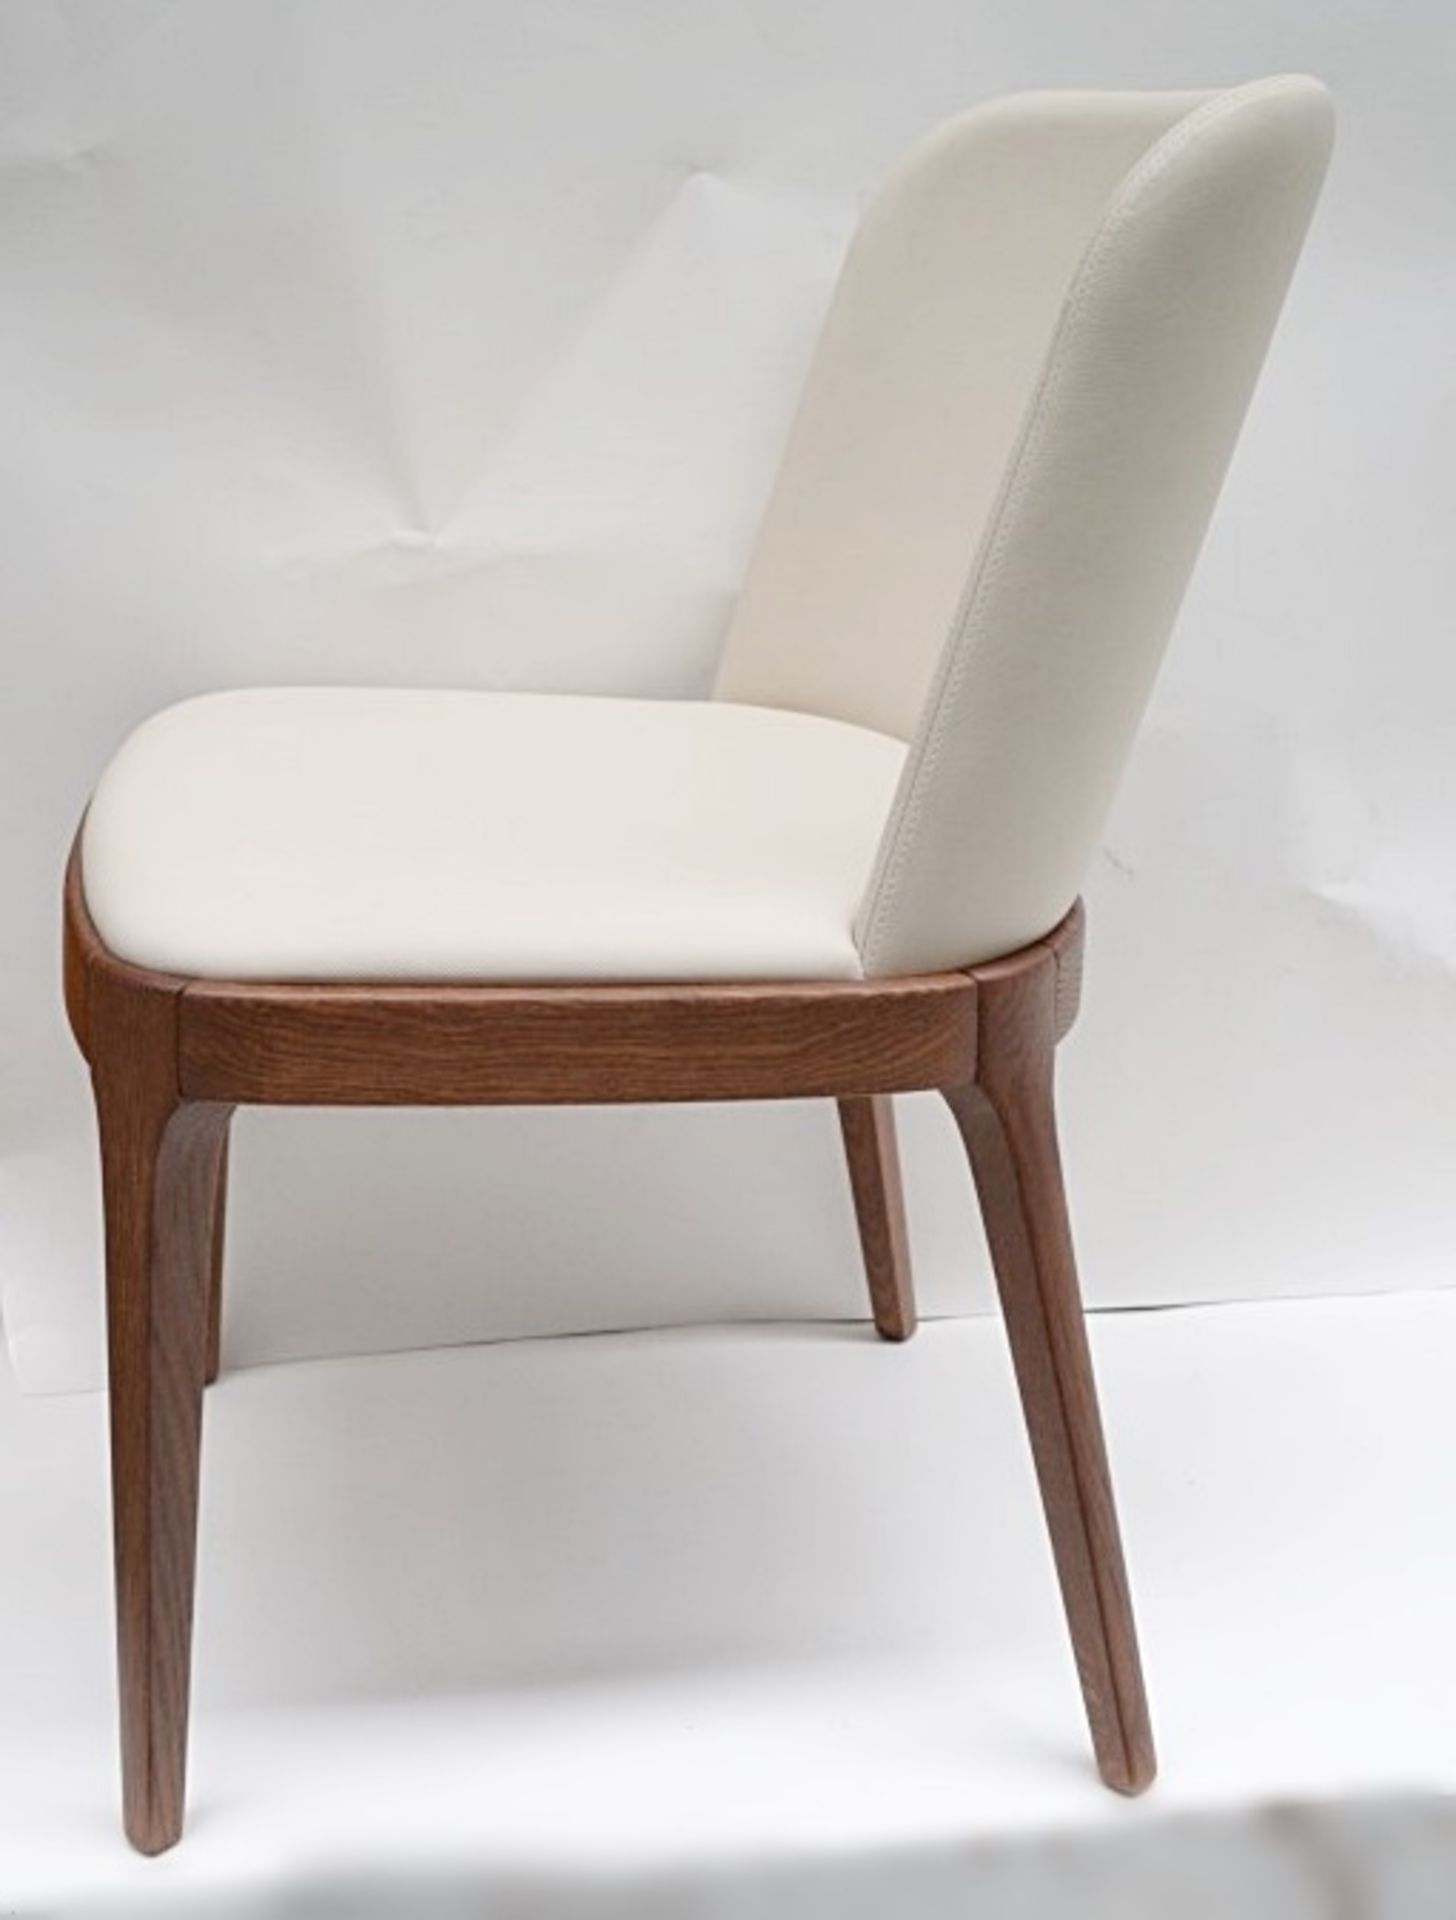 4 x Matching CATTELAN "Magda" Leather & Oak Chairs - Dimensions: w:53 d:55 h:81cm (seat height 48cm) - Image 2 of 7